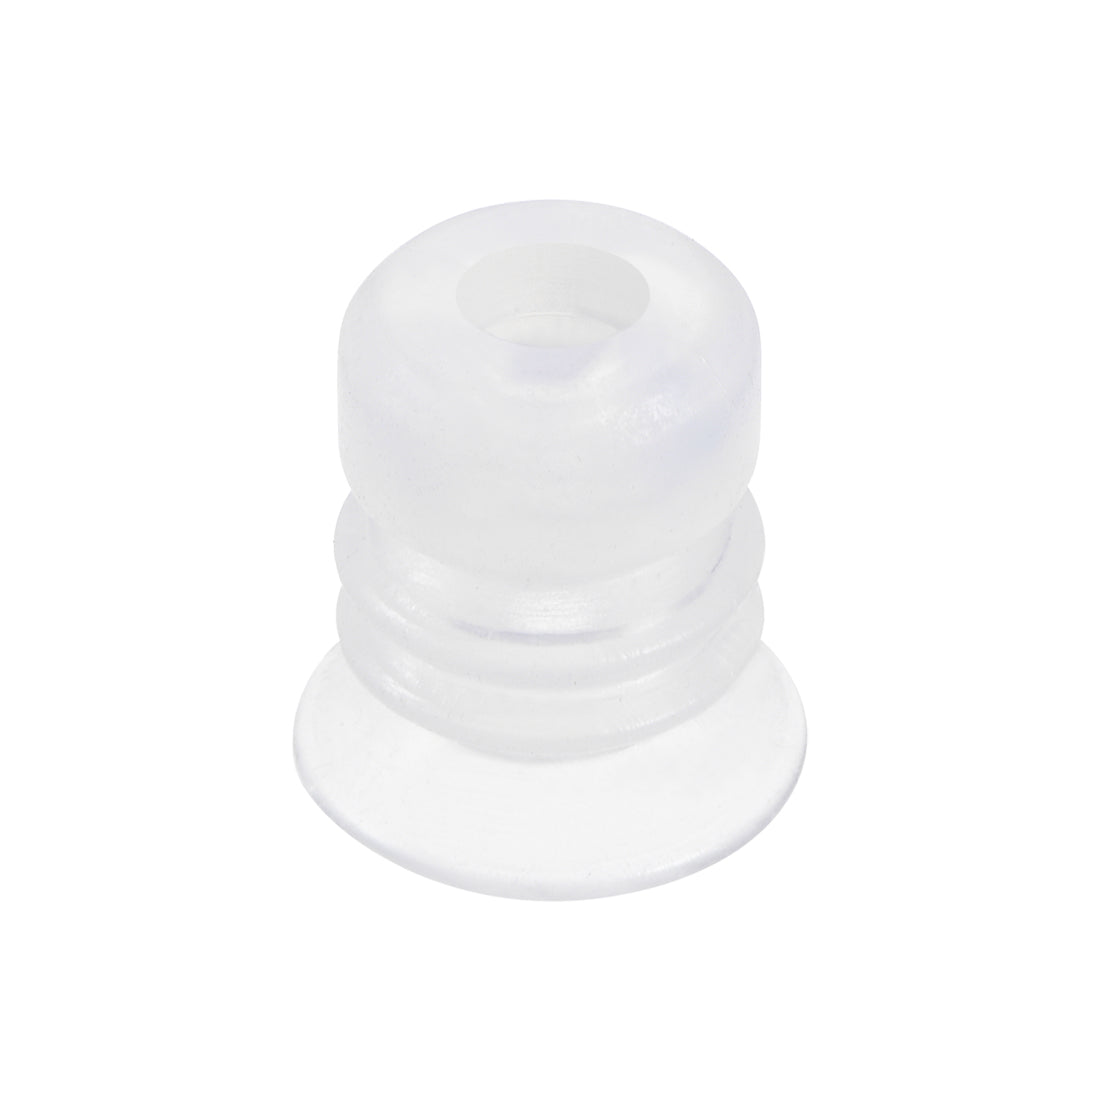 uxcell Uxcell Clear White Soft Silicone Waterproof Vacuum Suction Cup 15mmx5mm Bellows Suction Cup